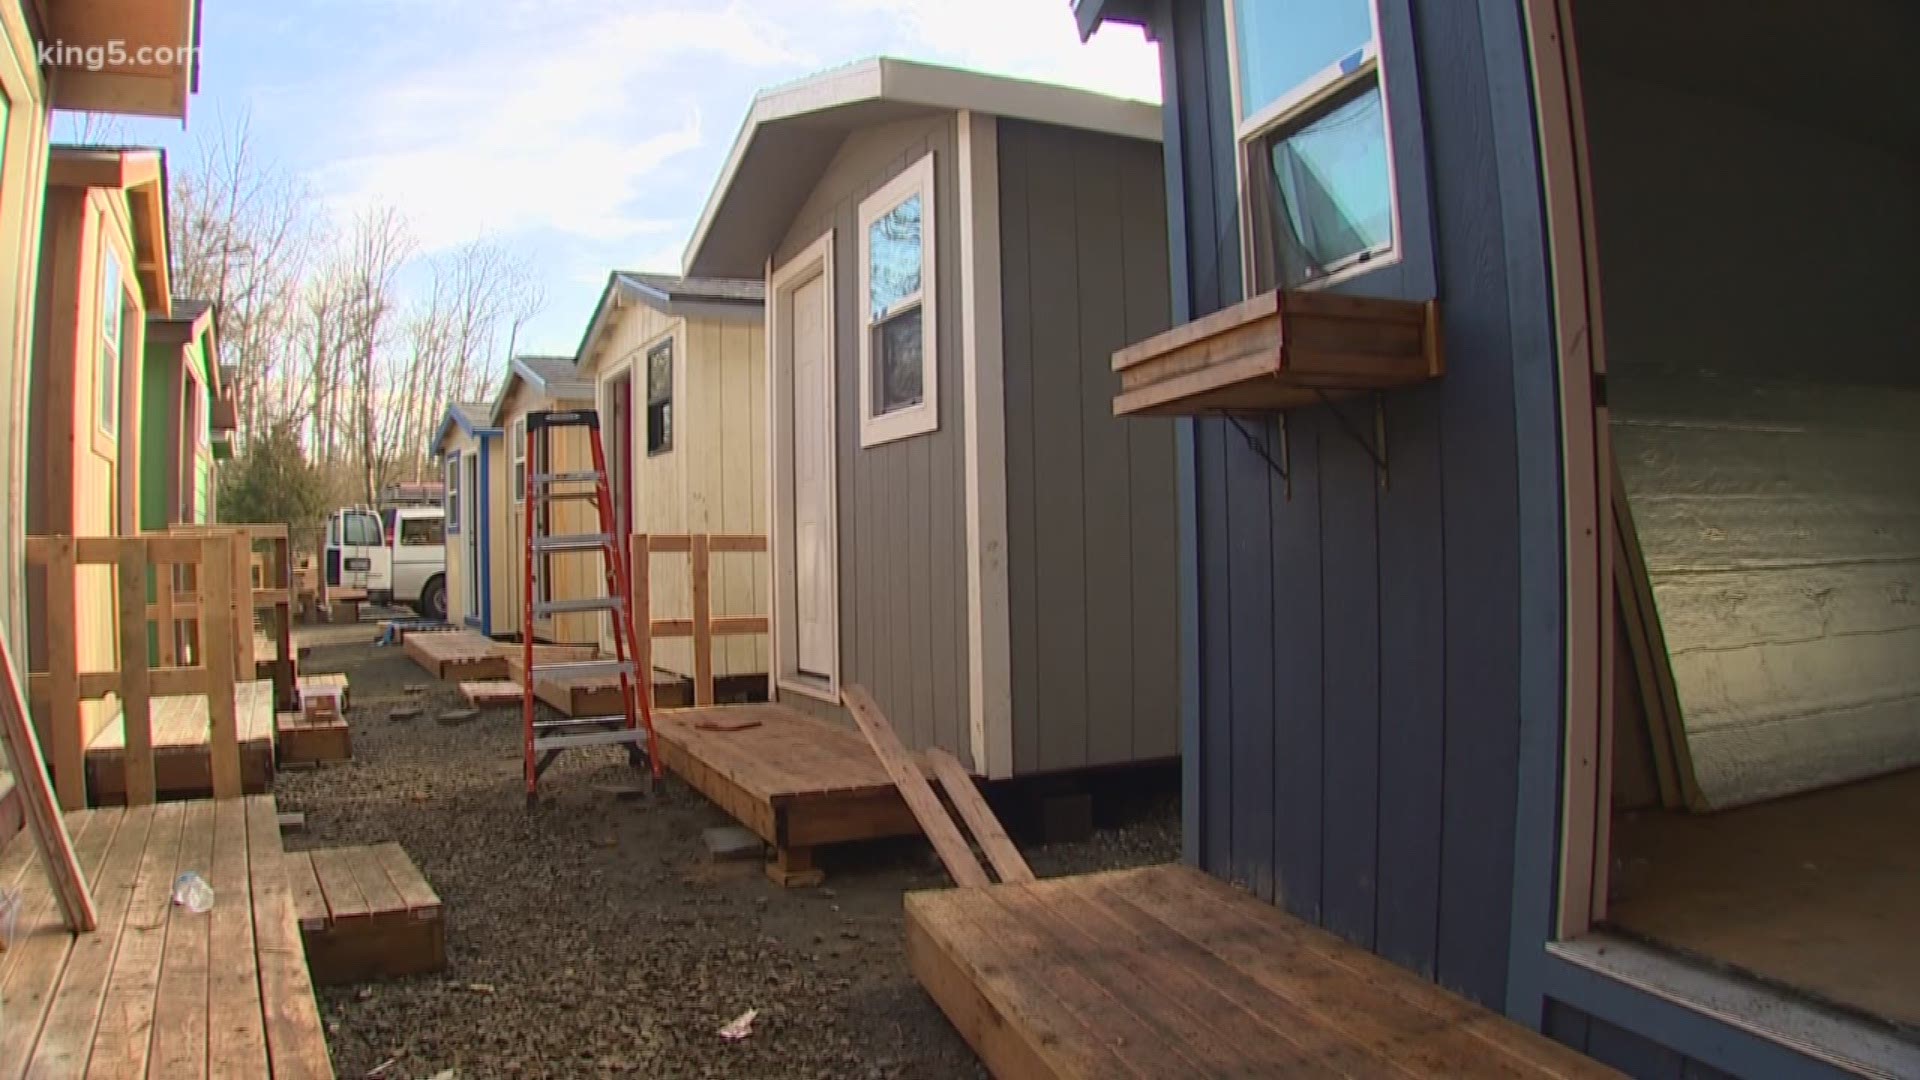 The homeless in Olympia are about to have a new place to live, but not everyone is excited about the plan. South Bureau Chief Drew Mikkelsen was in the city's new tiny home village, where he got a guarantee of sorts.